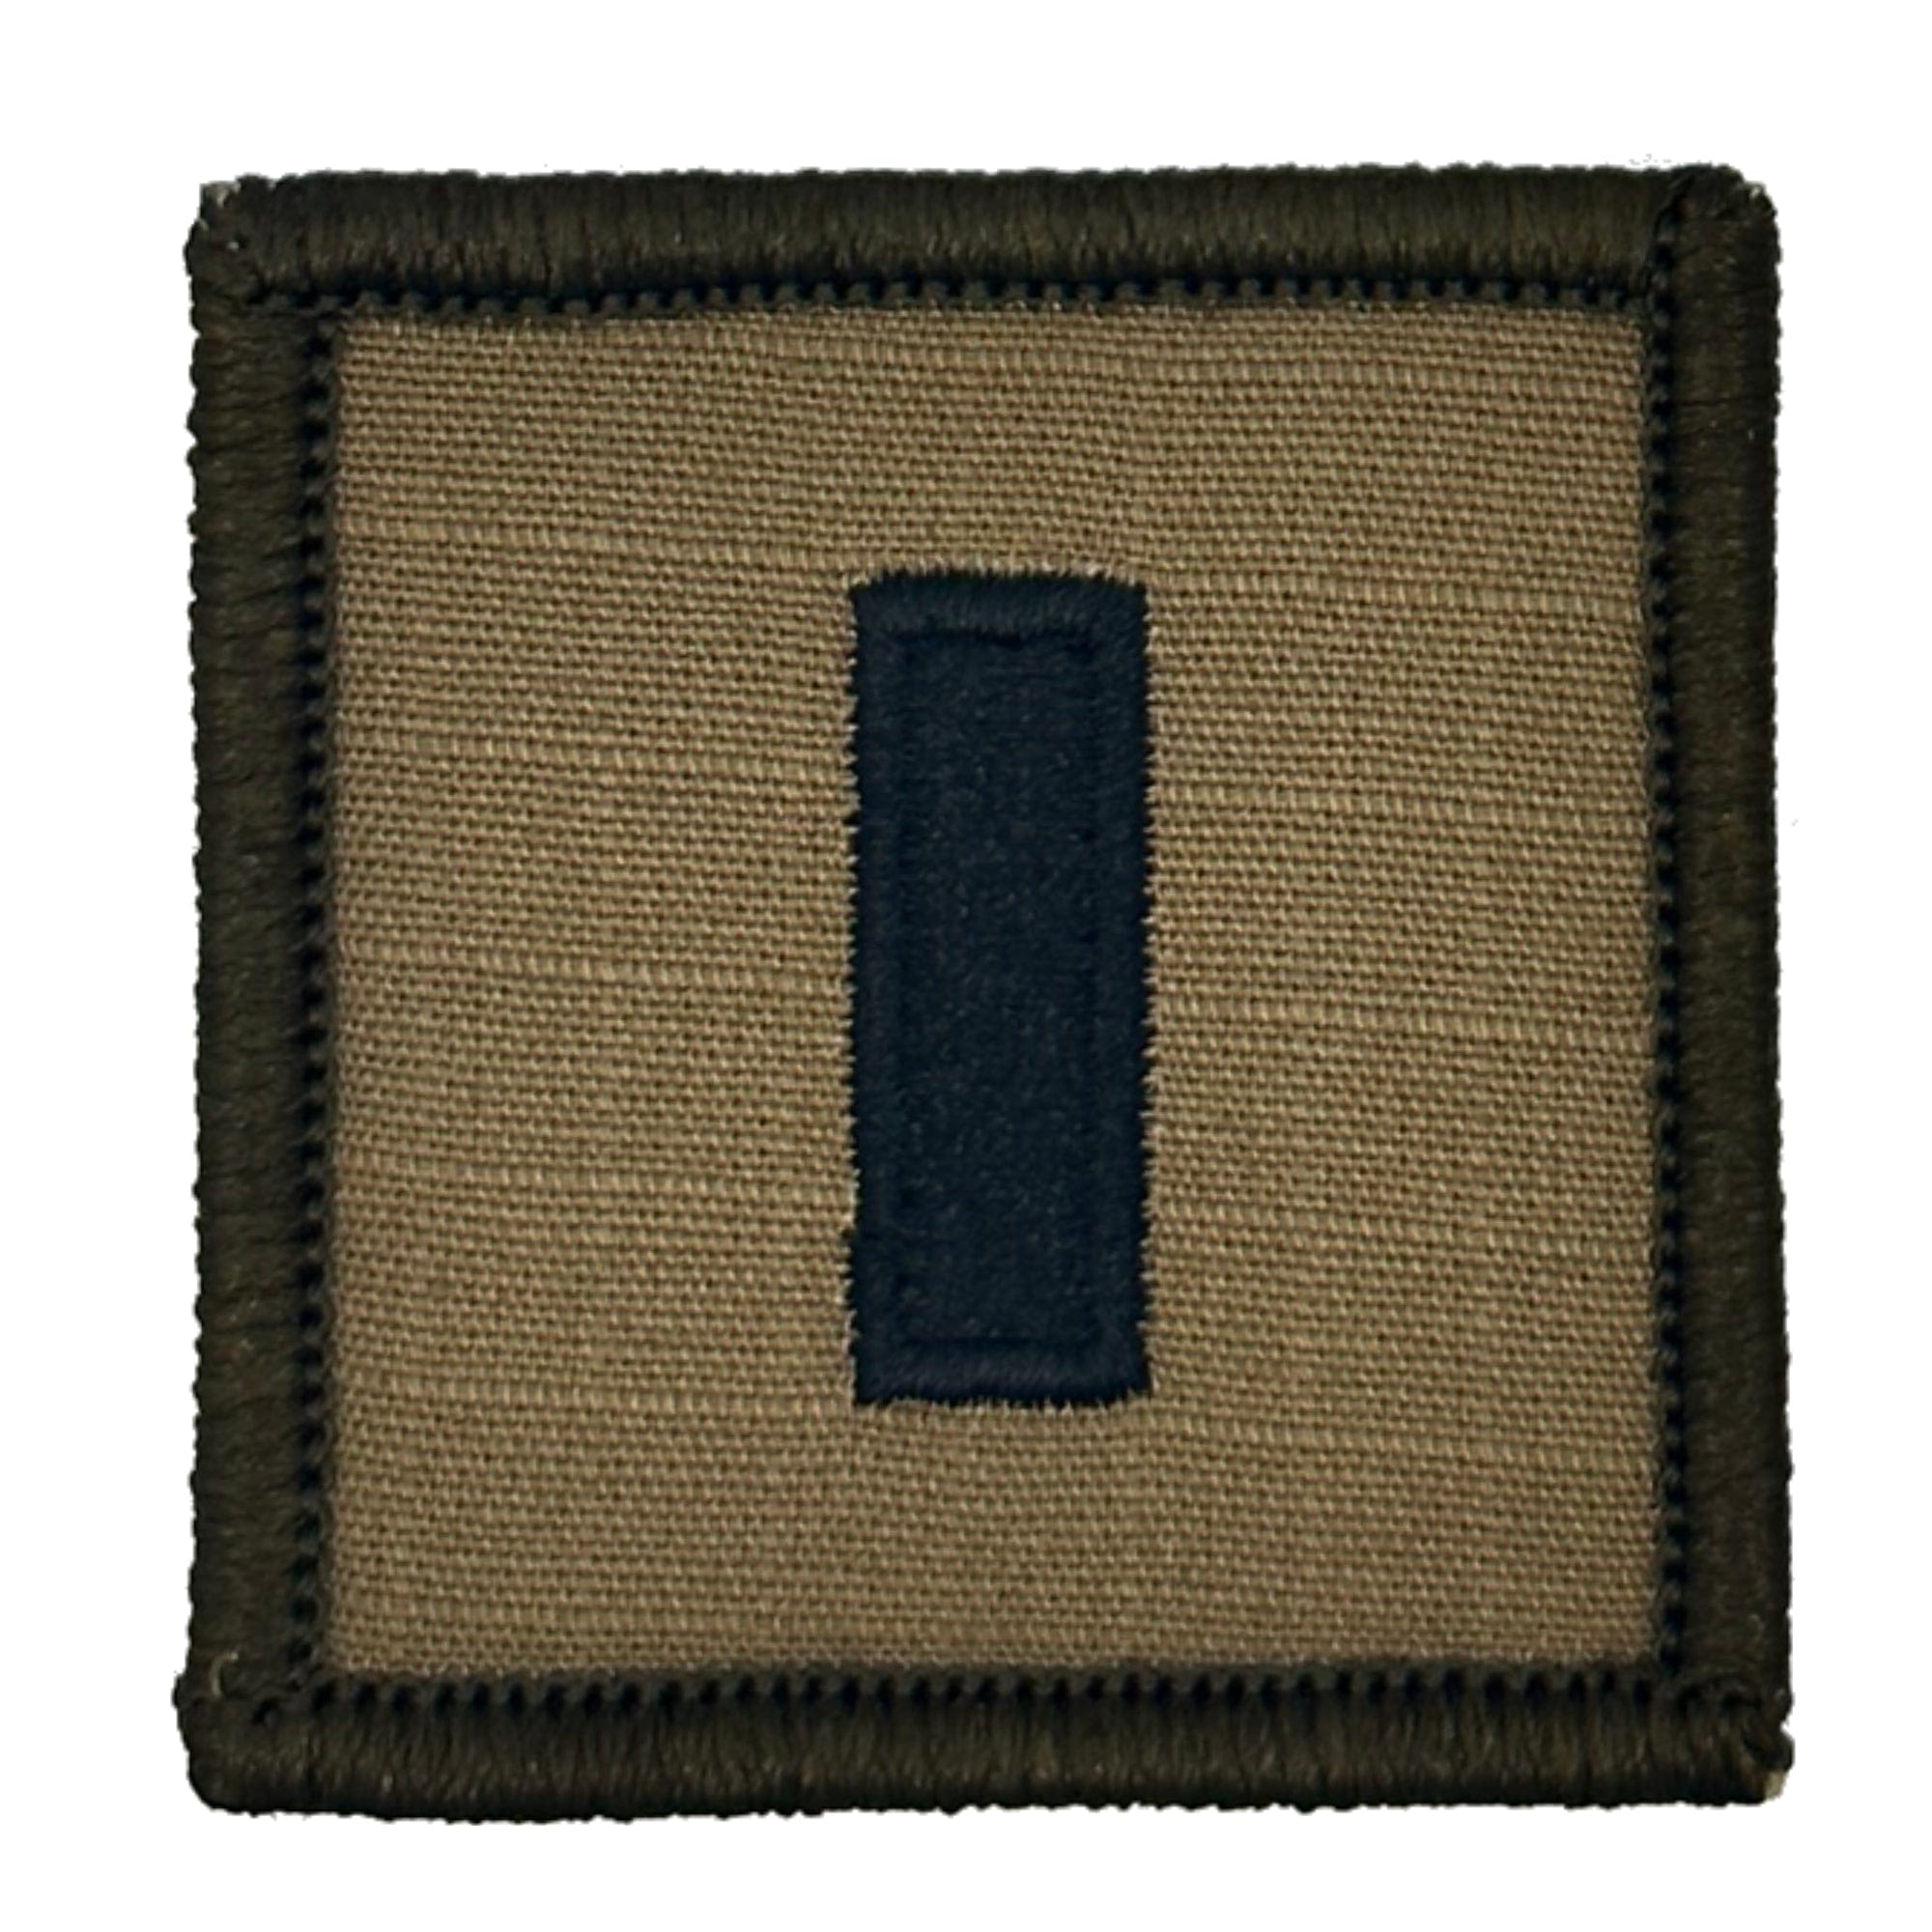 Tactical Gear Junkie Patches Coyote Brown / 1st Lieutenant USMC Rank Insignia - 2x2 Patch